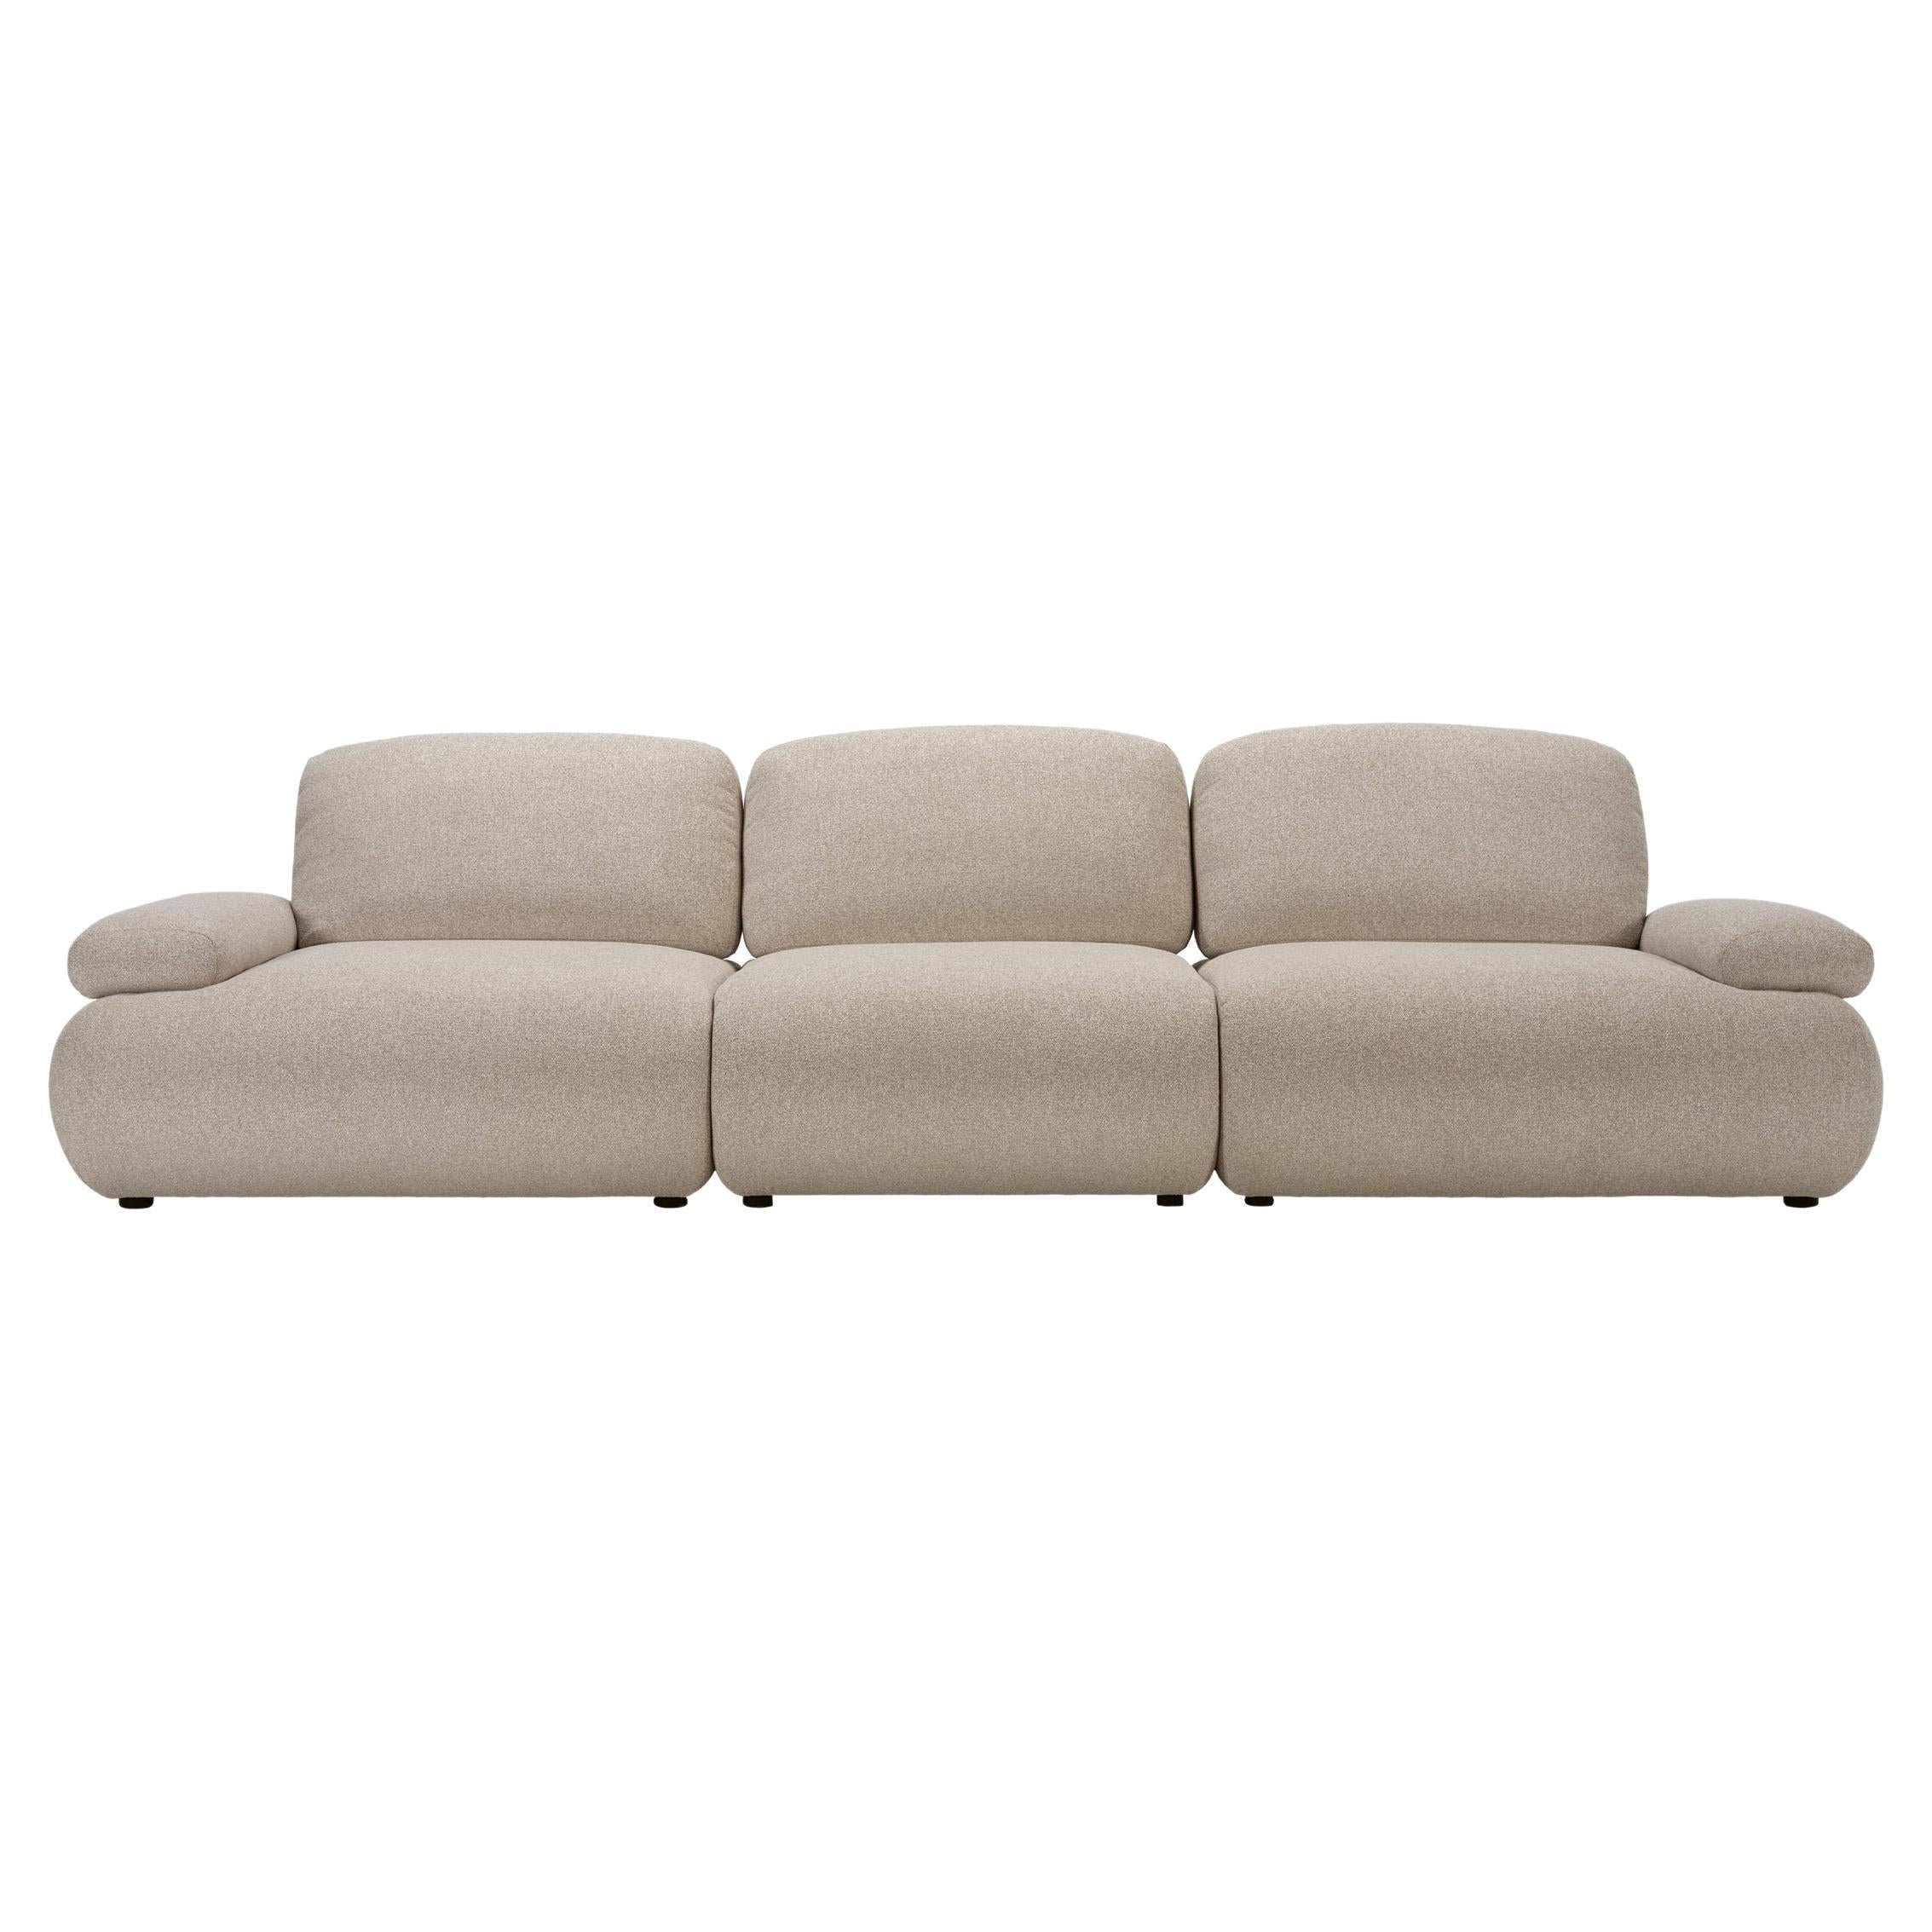 What is a modular couch?